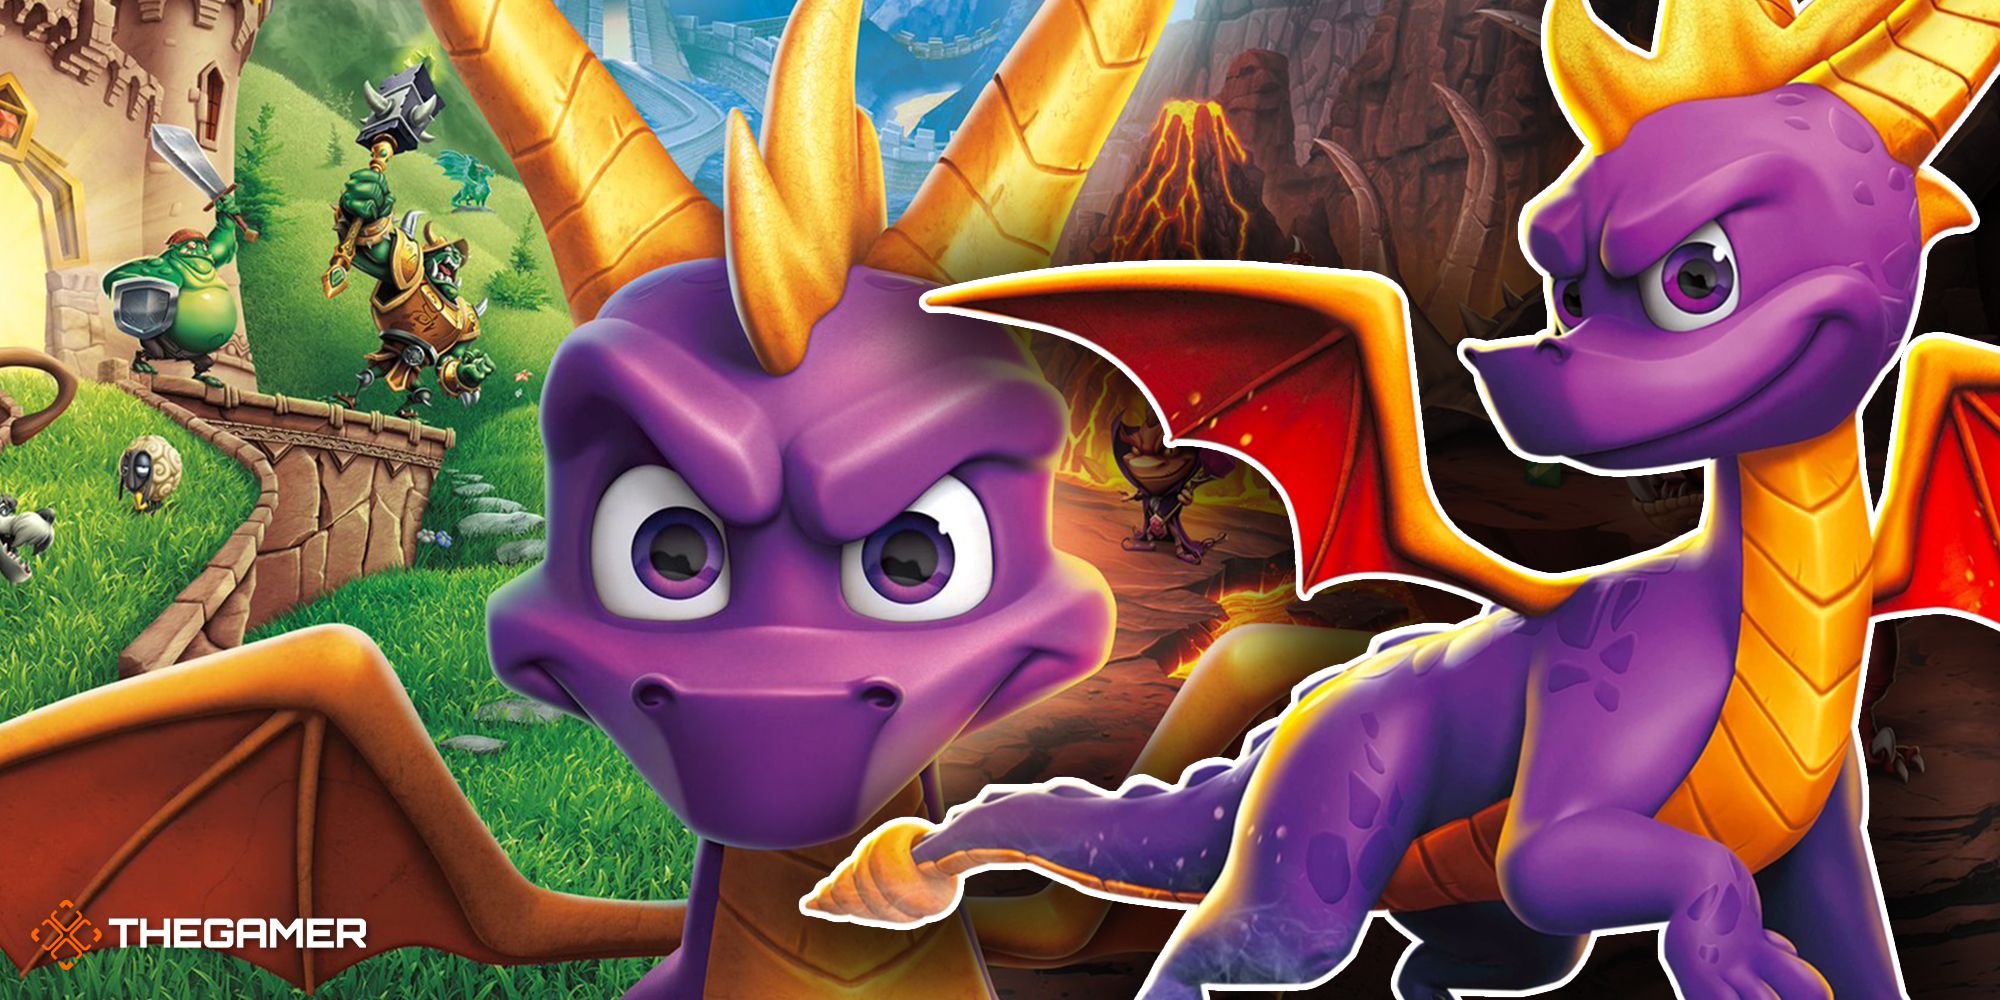 Game art from Spyro Reignited Trilogy and Spyro 2: Ripto's Rage.